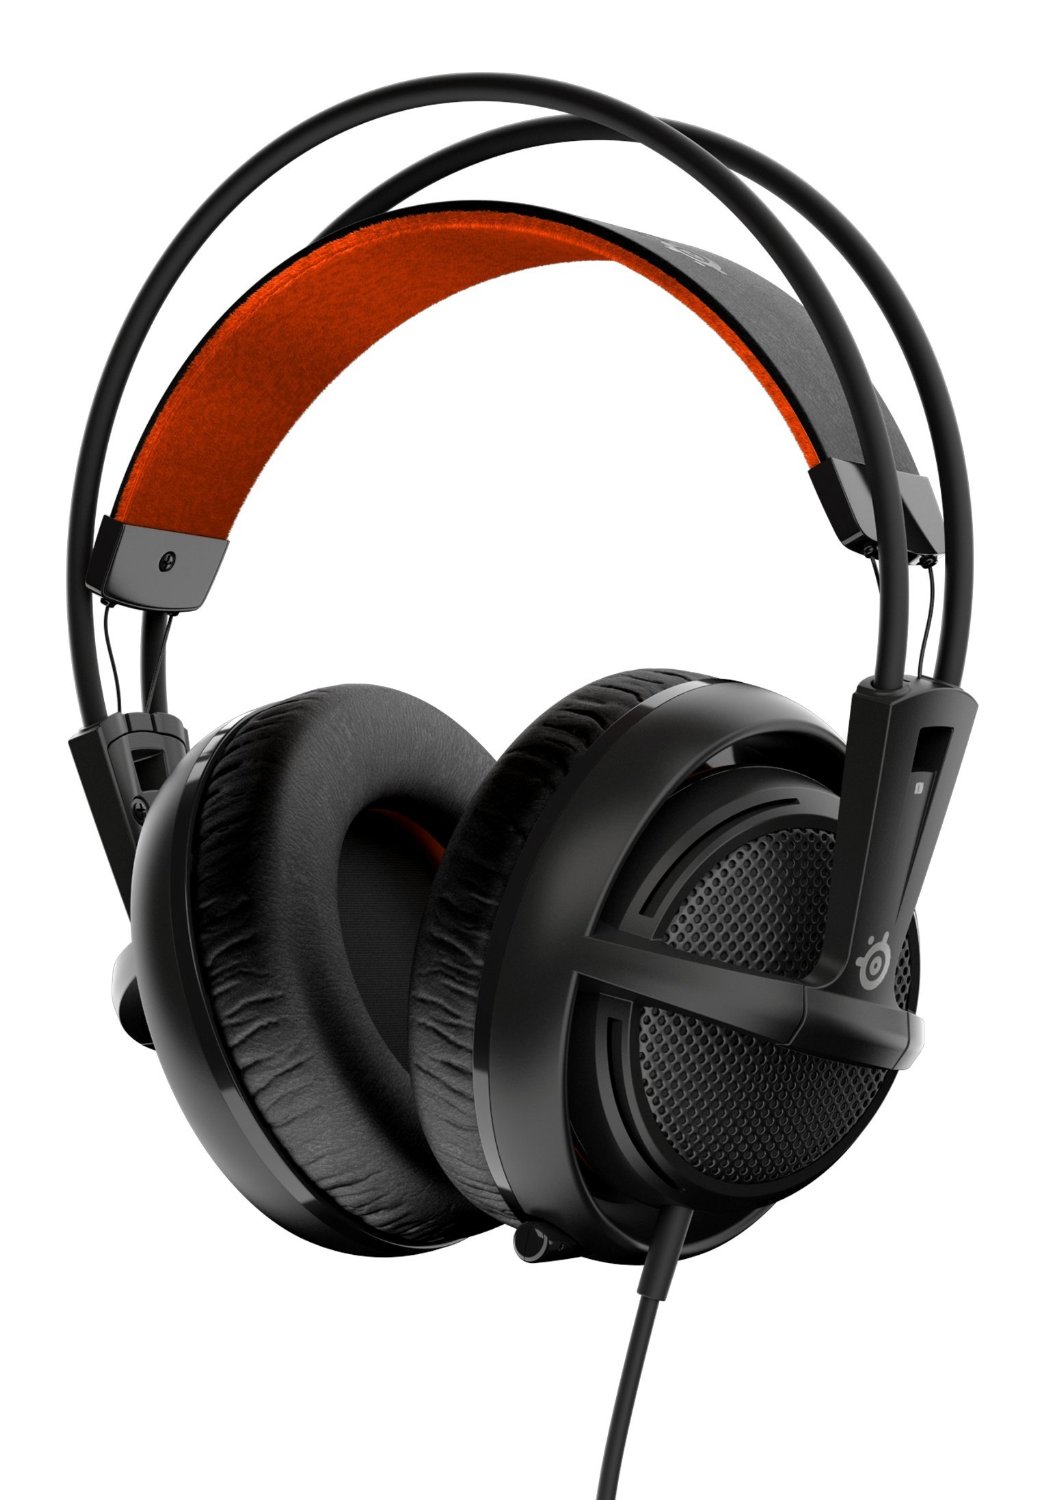 Amazon - Buy SteelSeries Siberia 200 51133 Gaming Headset (Black) for Rs.2499 (65% off)